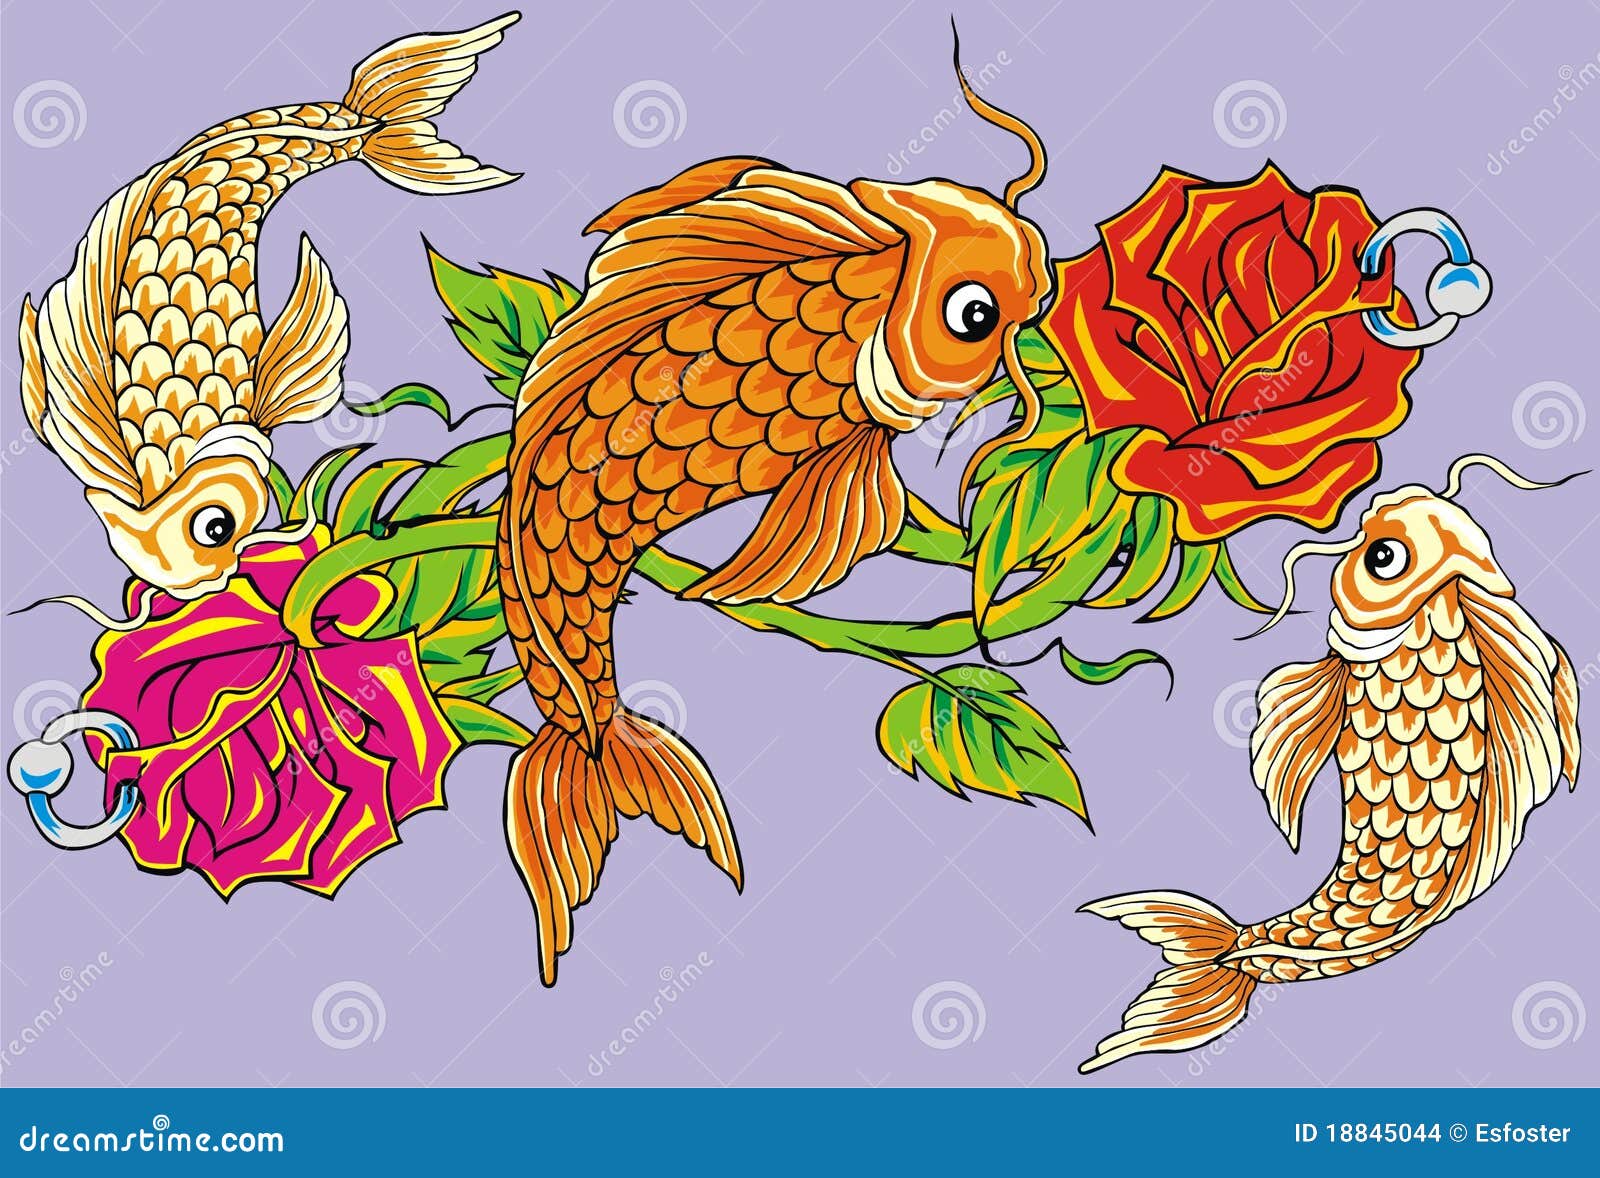 Flower fish tattoo stock vector. Illustration of graphical - 18845044